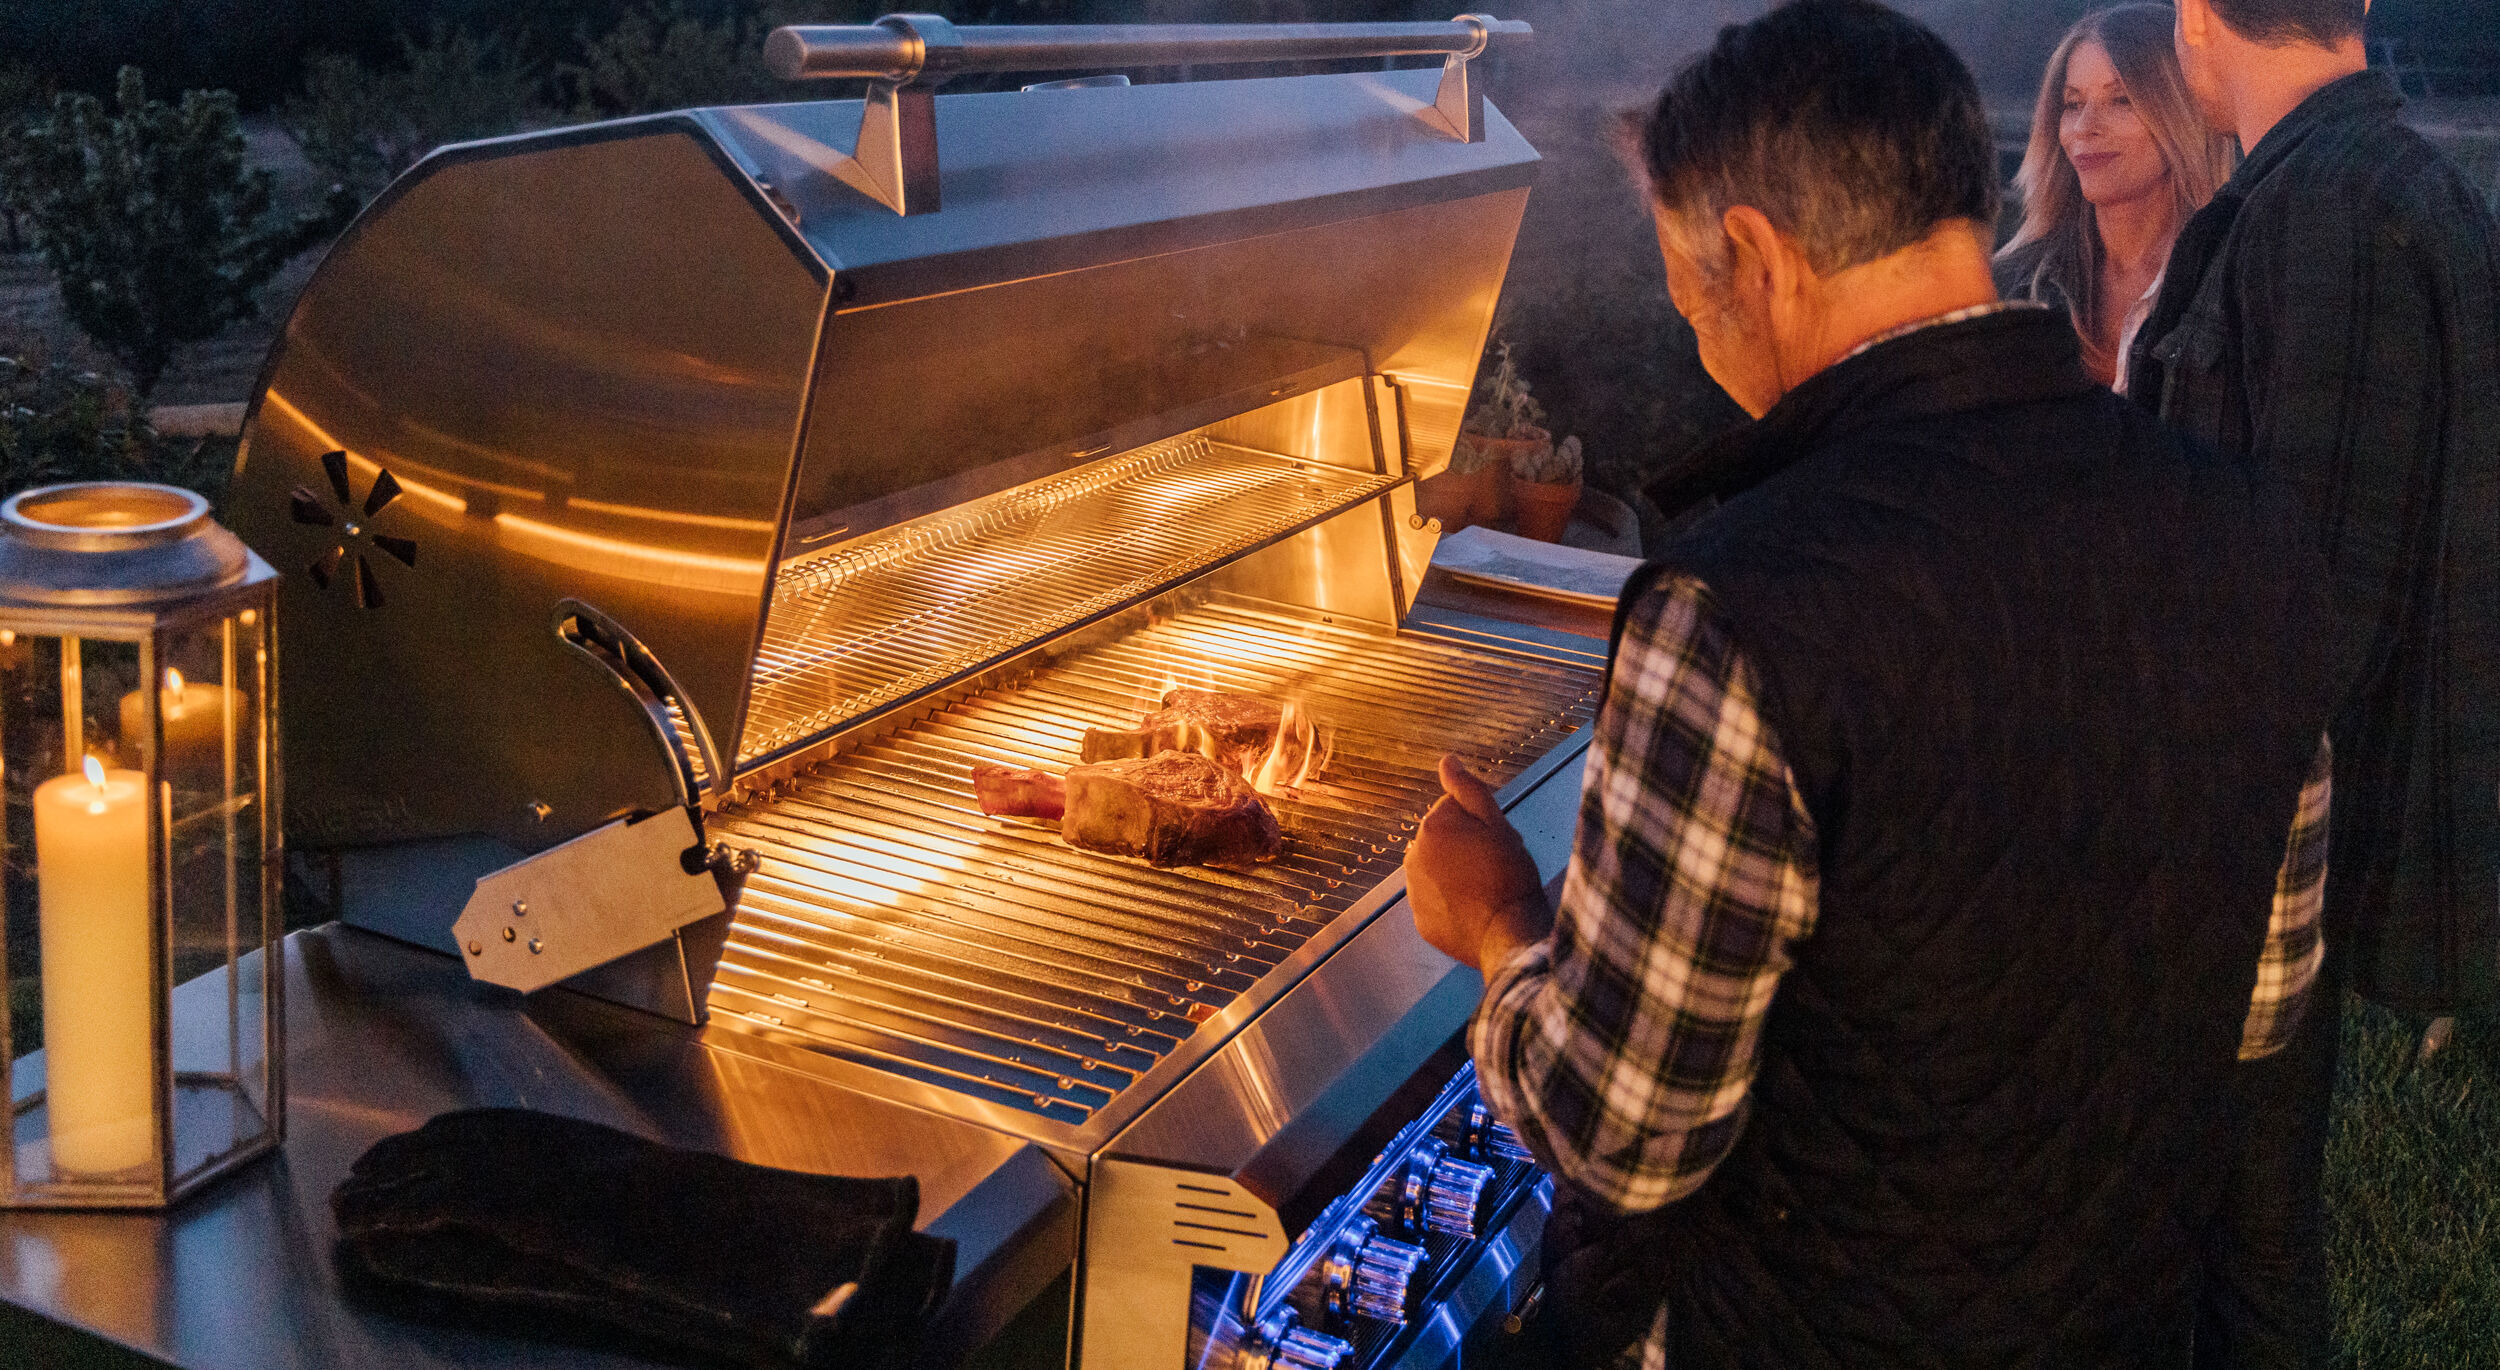 Three people gathered around a stainless steel grill at night, admiring two large steaks sizzling on the grates.